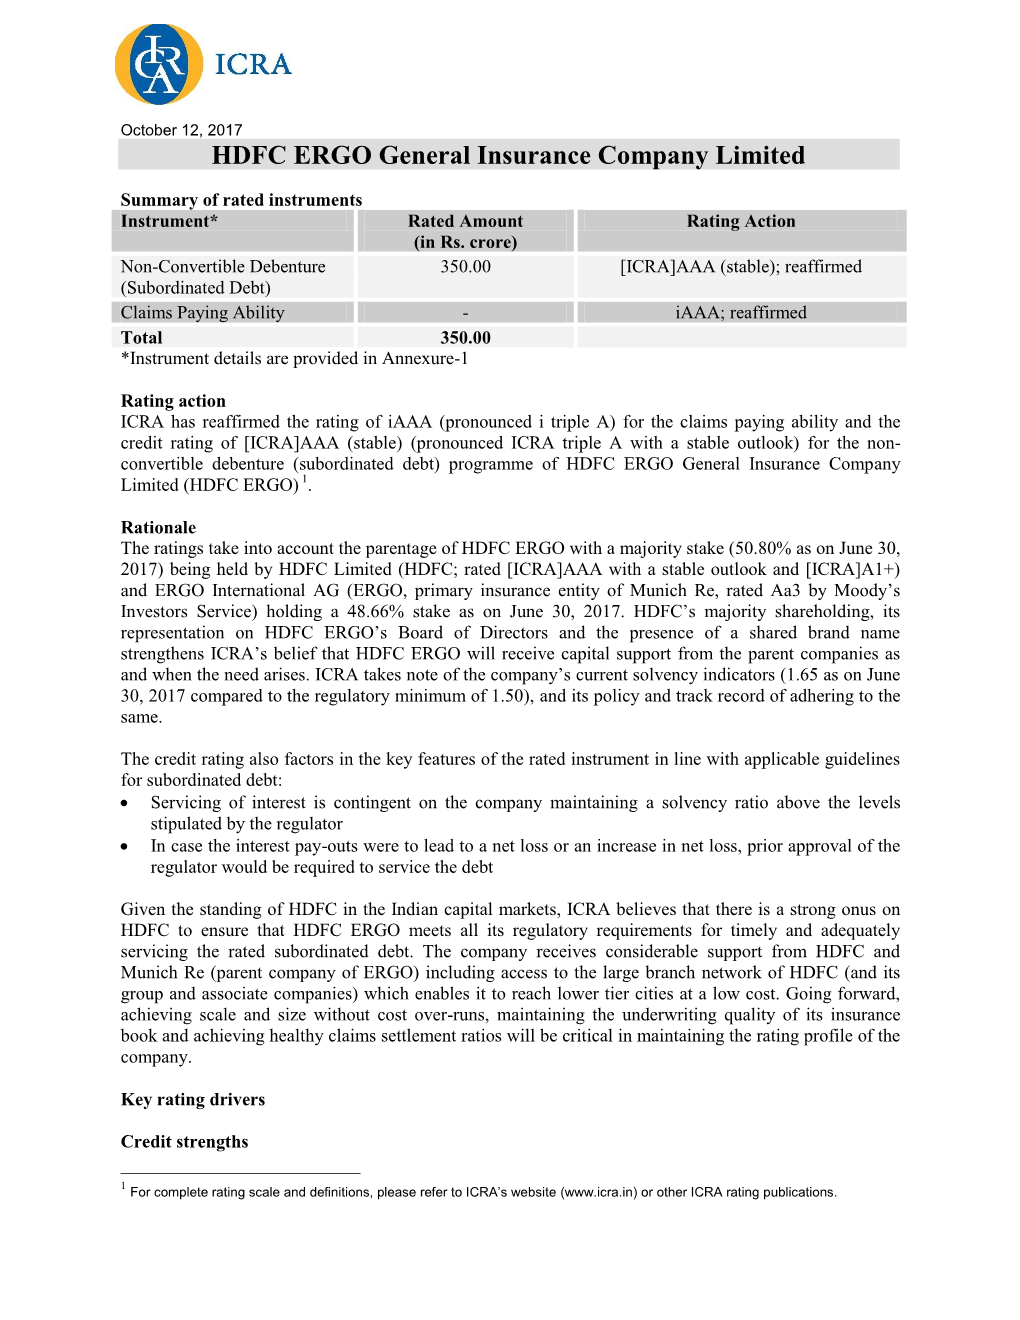 HDFC ERGO General Insurance Company Limited